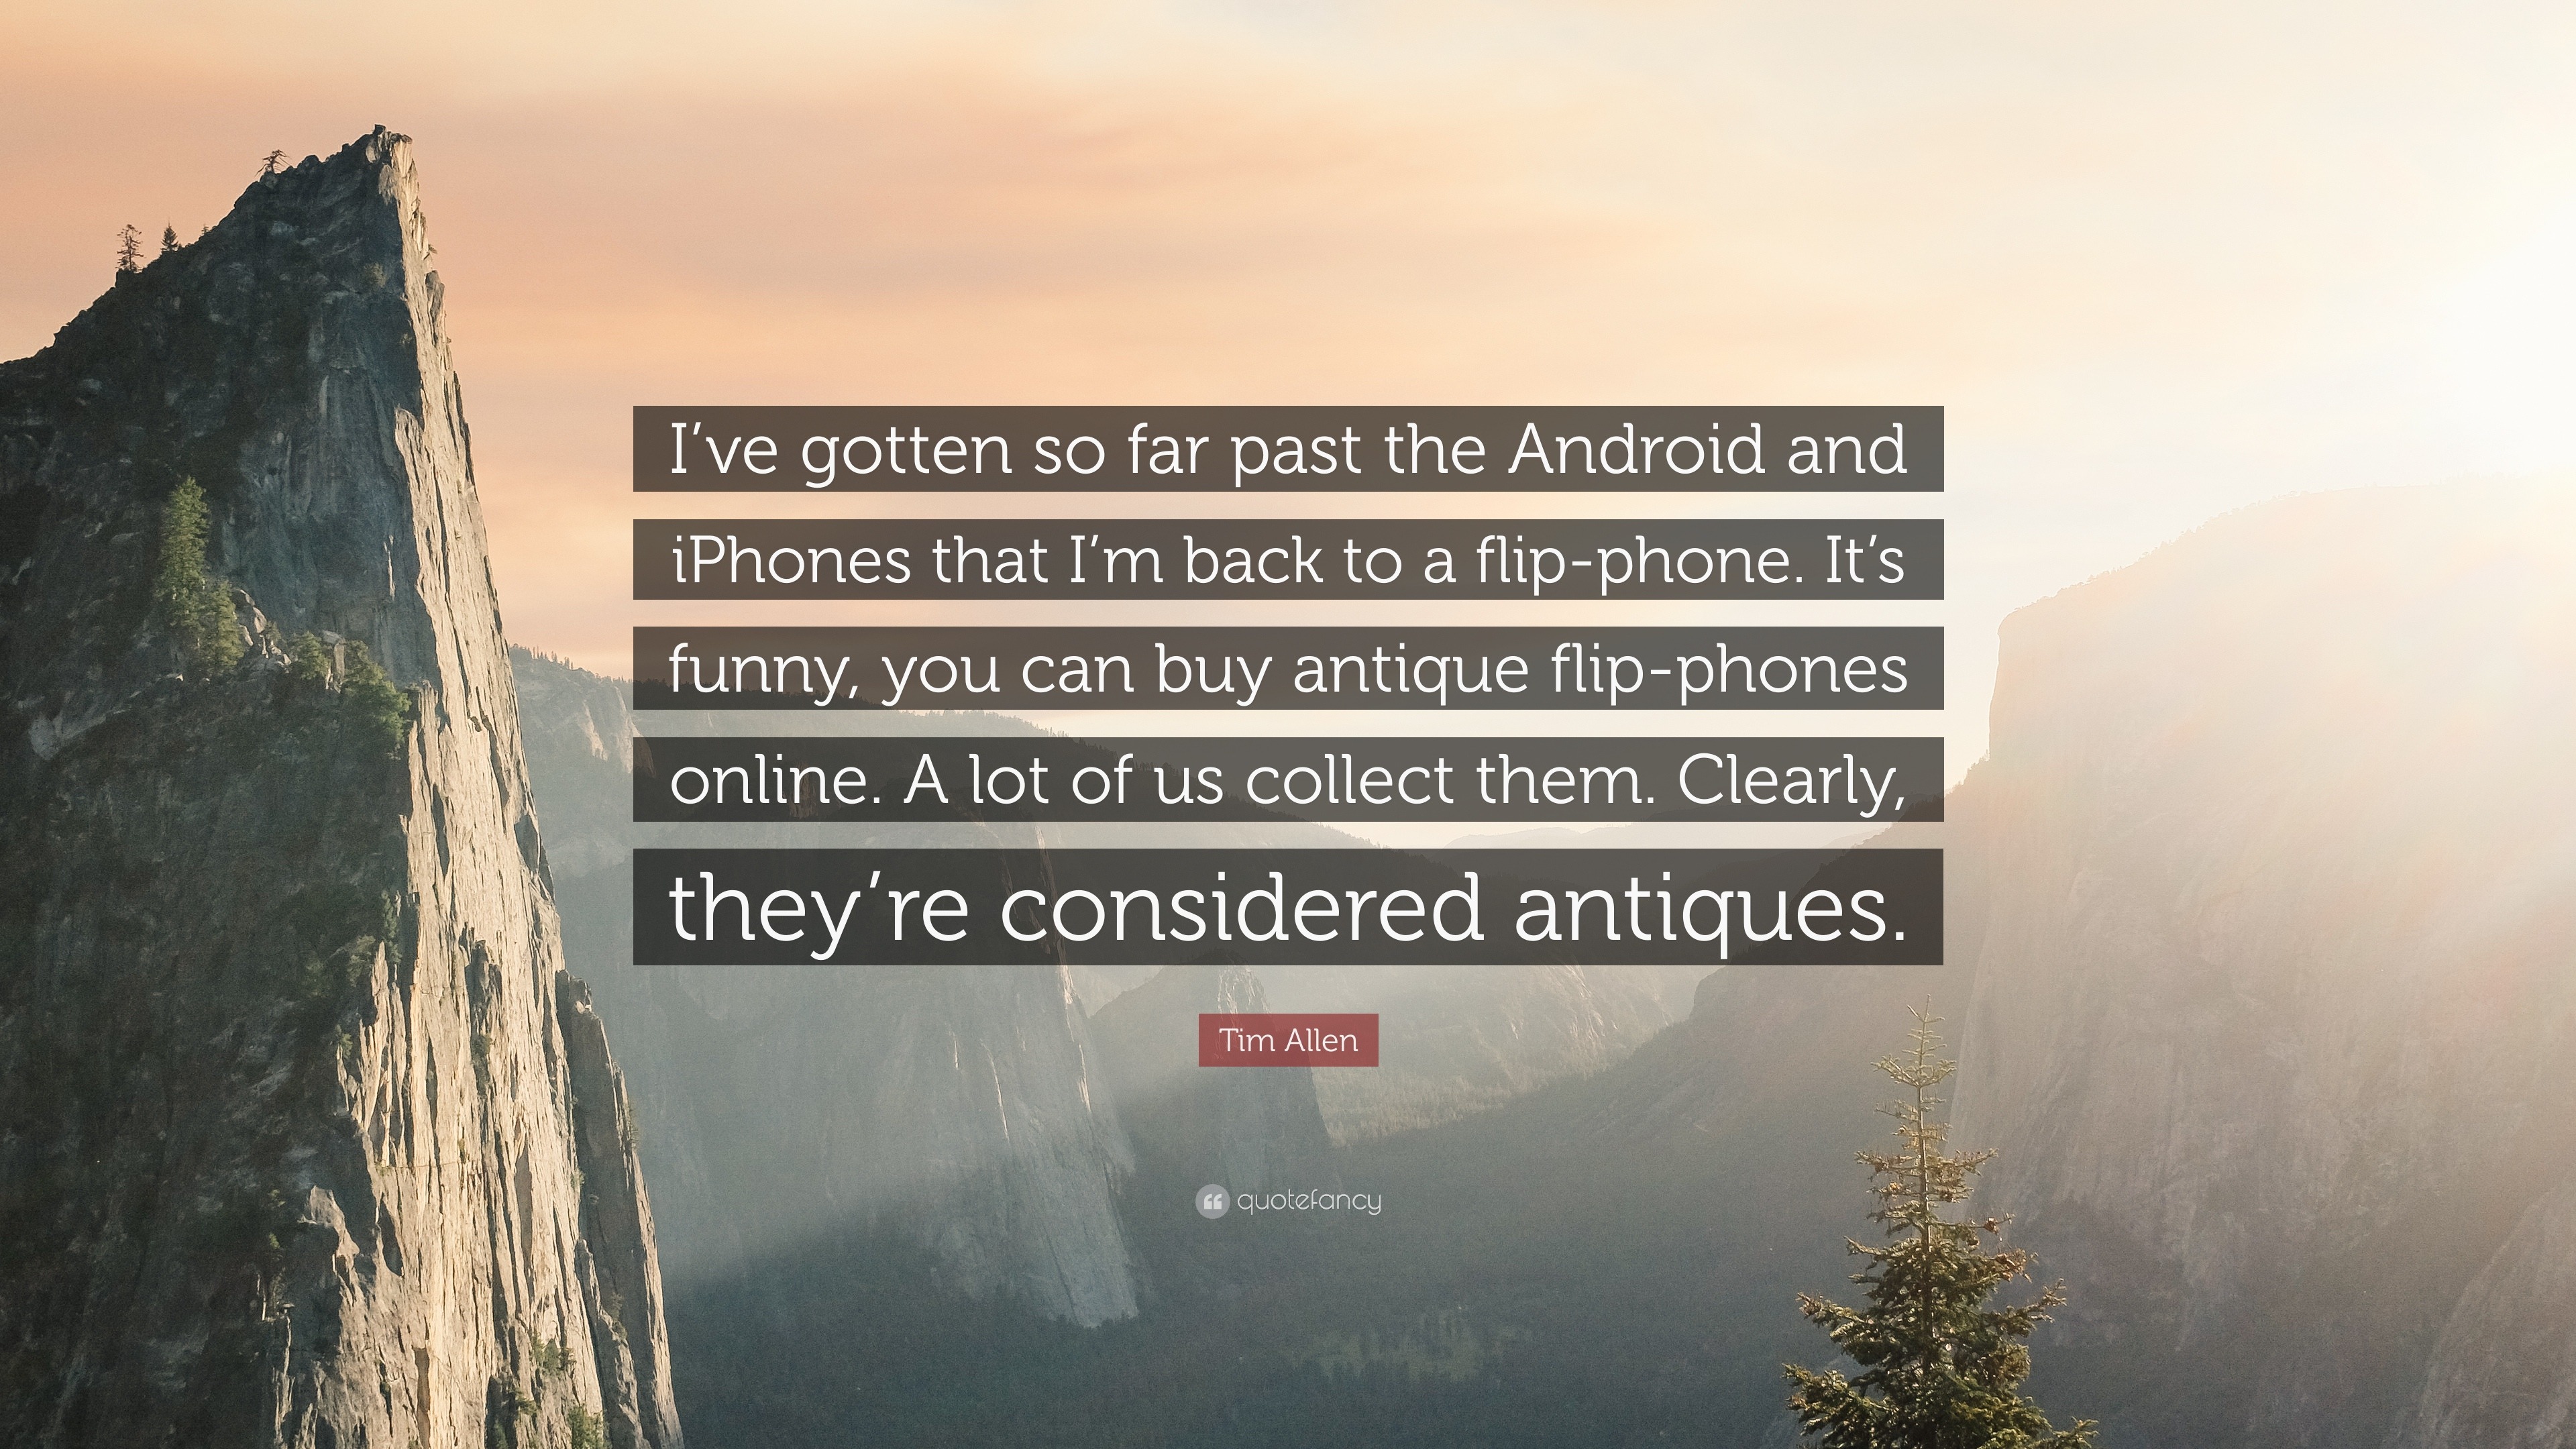 Tim Allen Quote: “I've gotten so far past the Android and iPhones that I'm  back to a flip-phone. It's funny, you can buy antique flip-phon...”